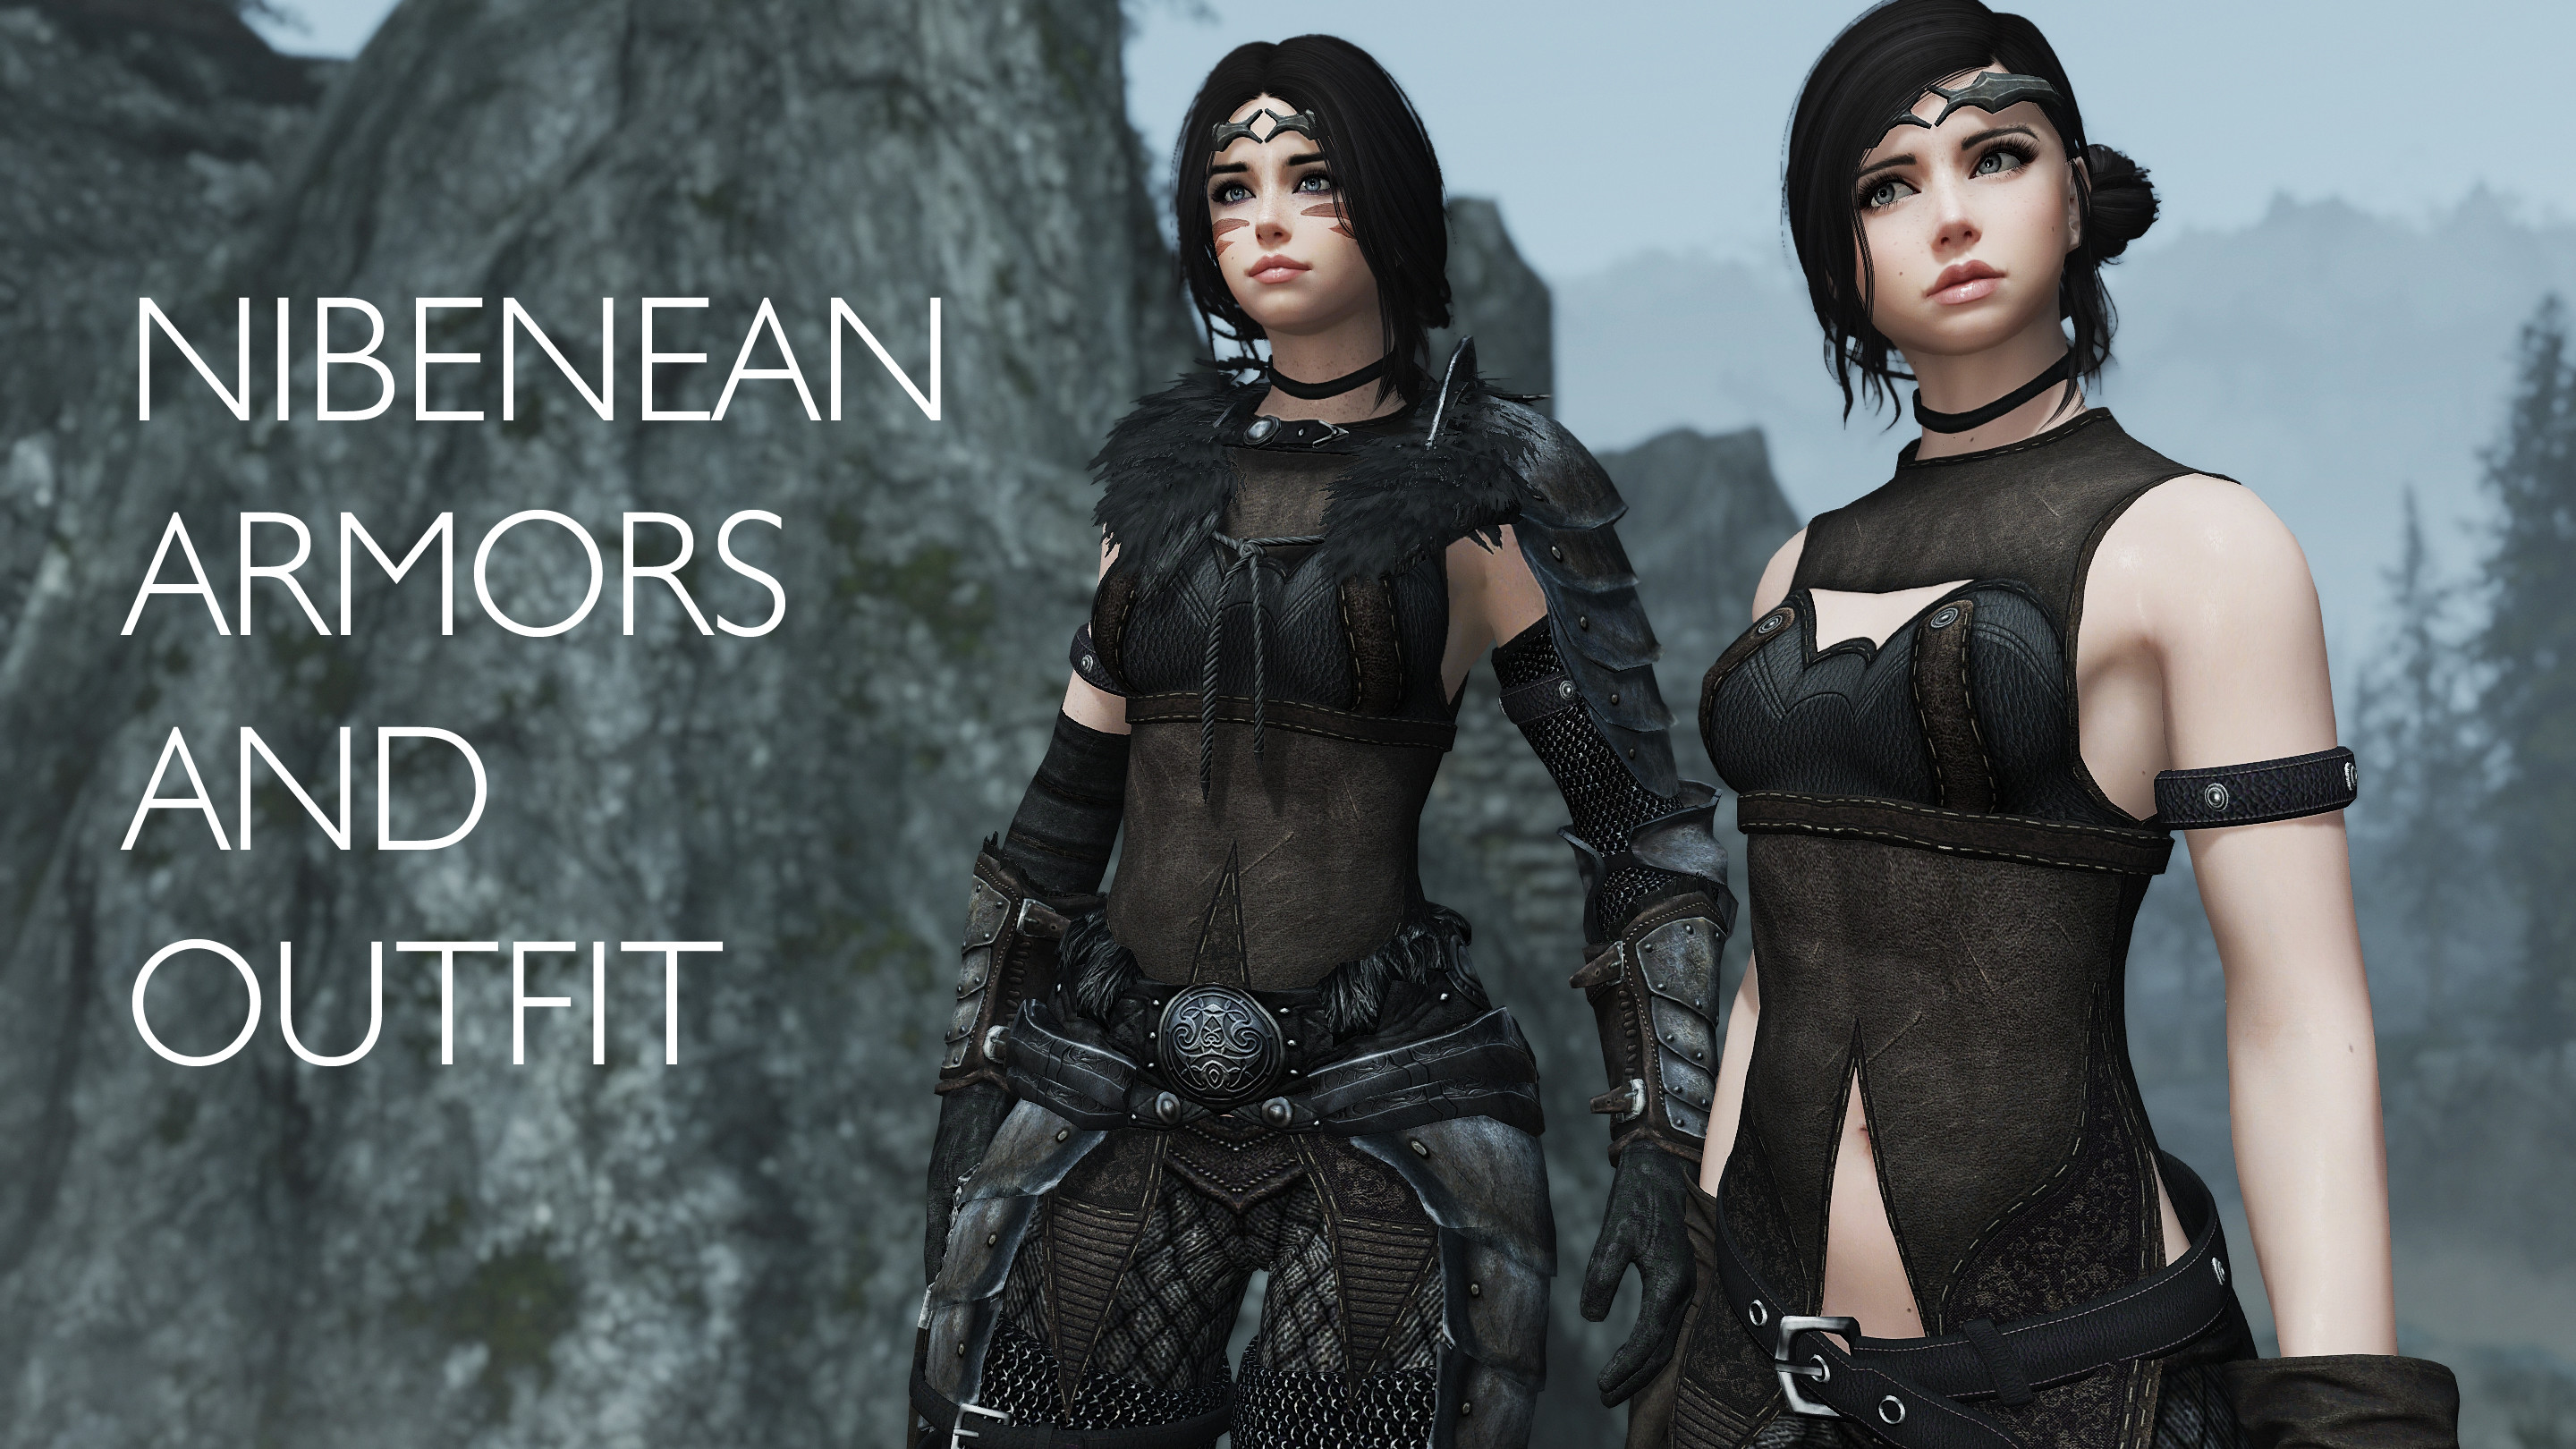 Nibenean Armors and Outfit